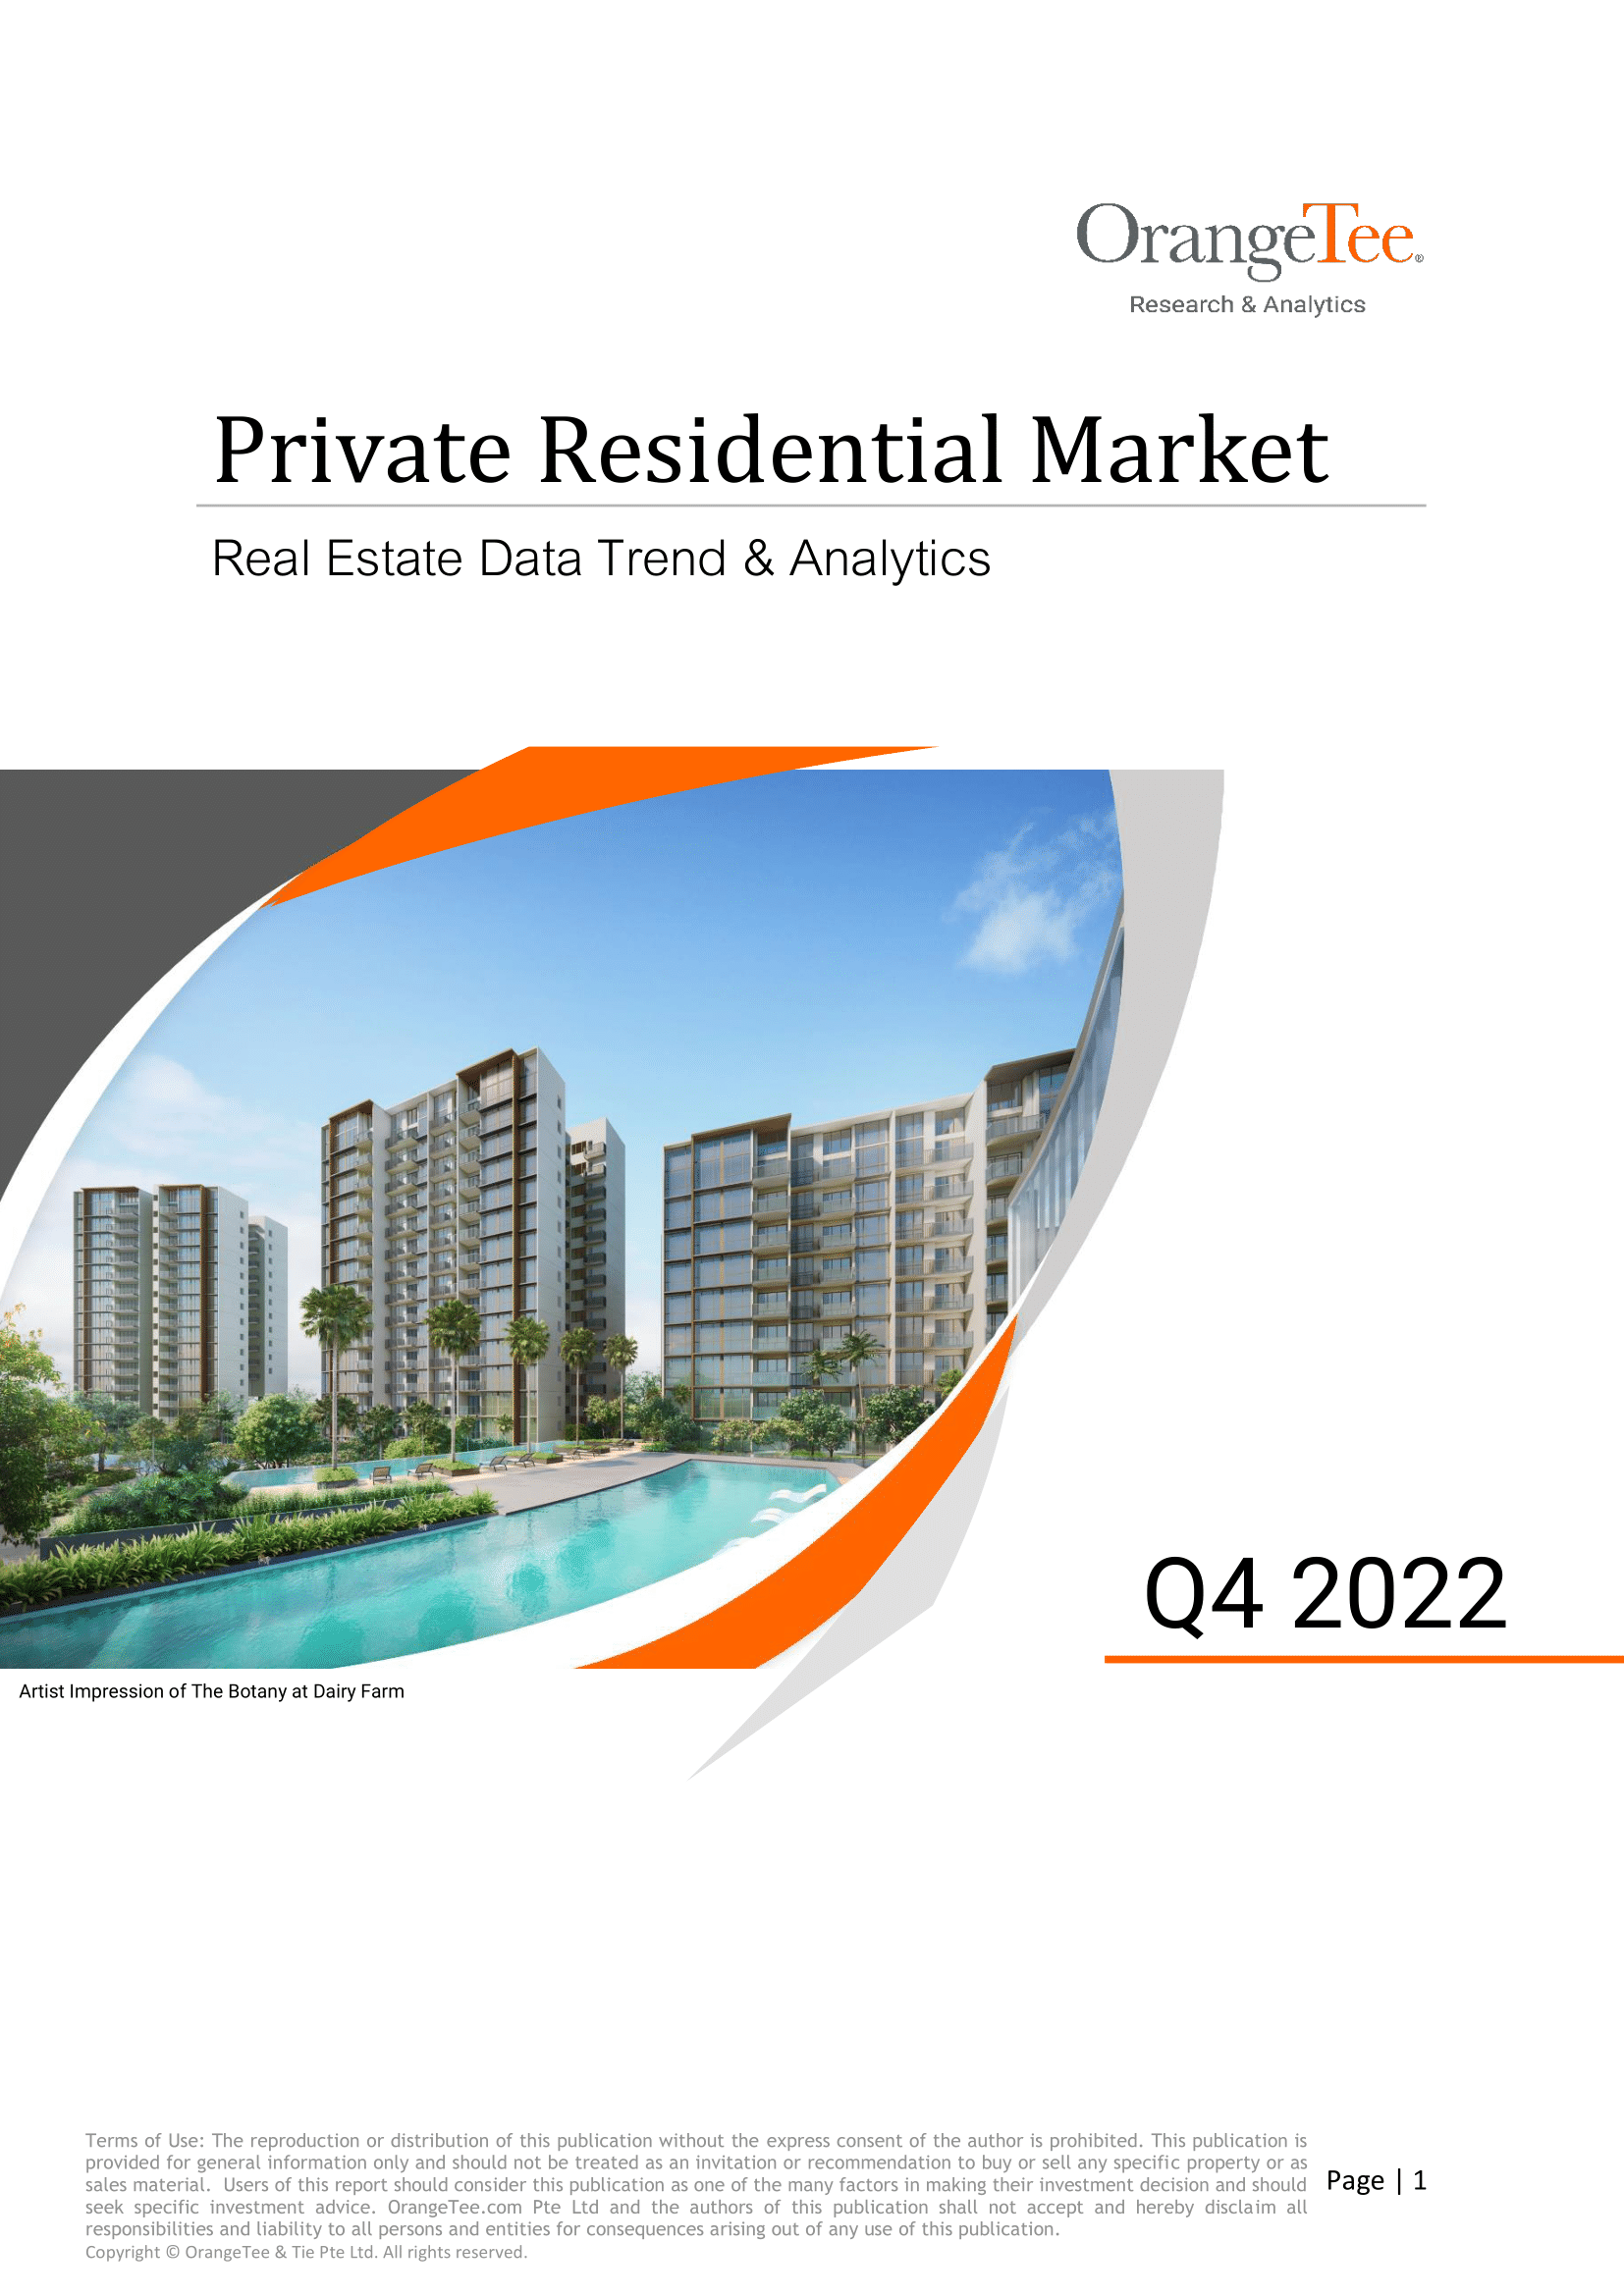 OrangeTee - Private Residential Market Report for Q4 2022-1.png